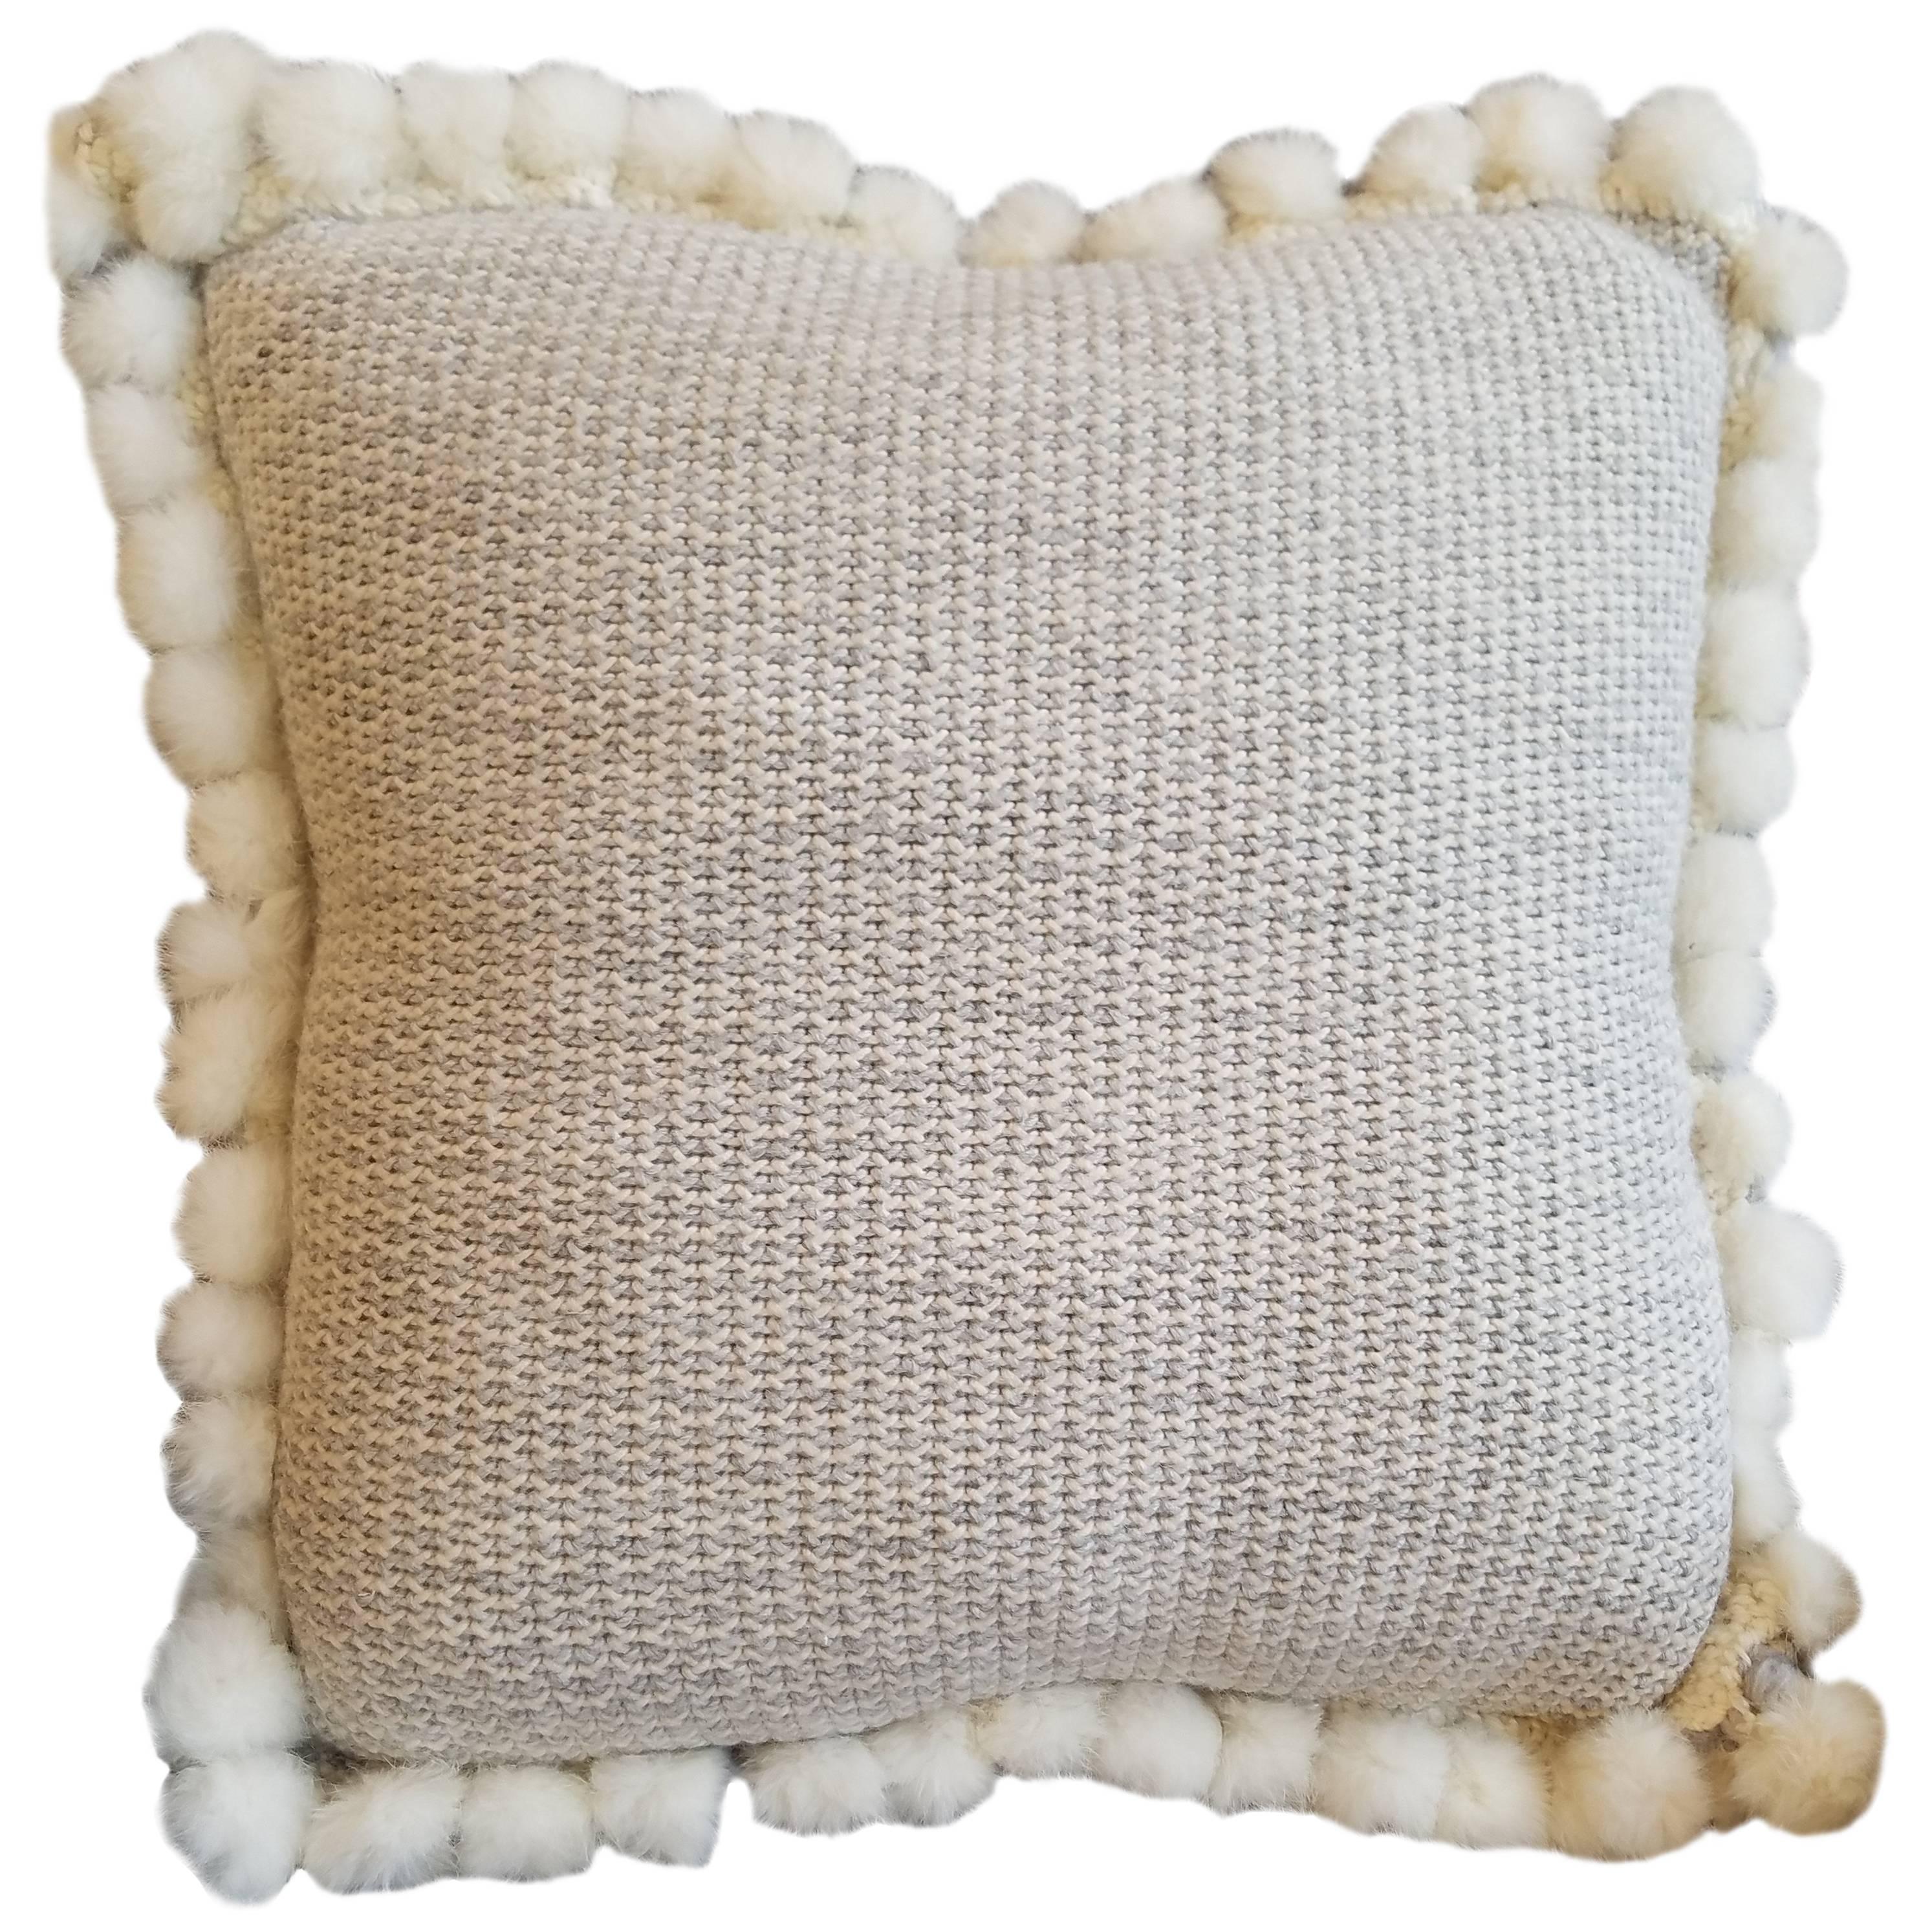 Handwoven Merino Wool Pillow with Angora Trim by Le Lampade